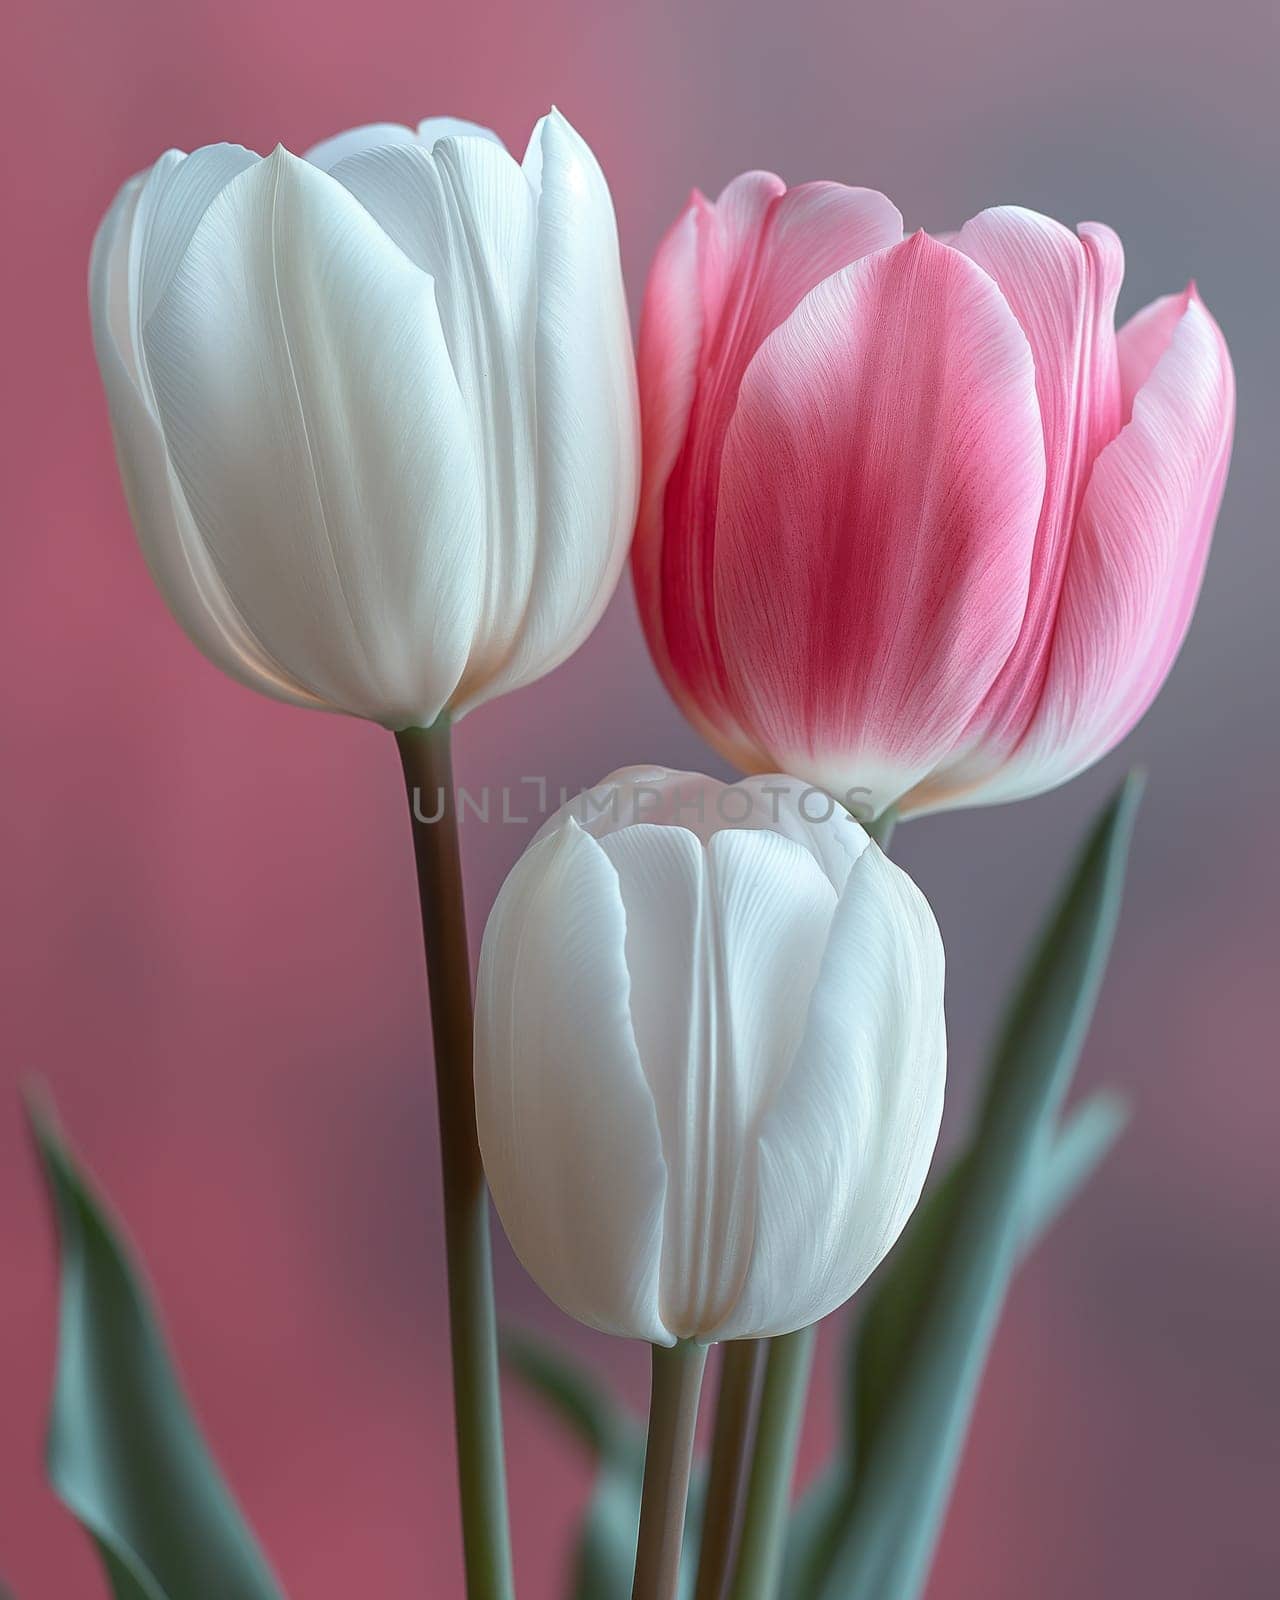 Blooming Tulips in Soft Light. by Fischeron